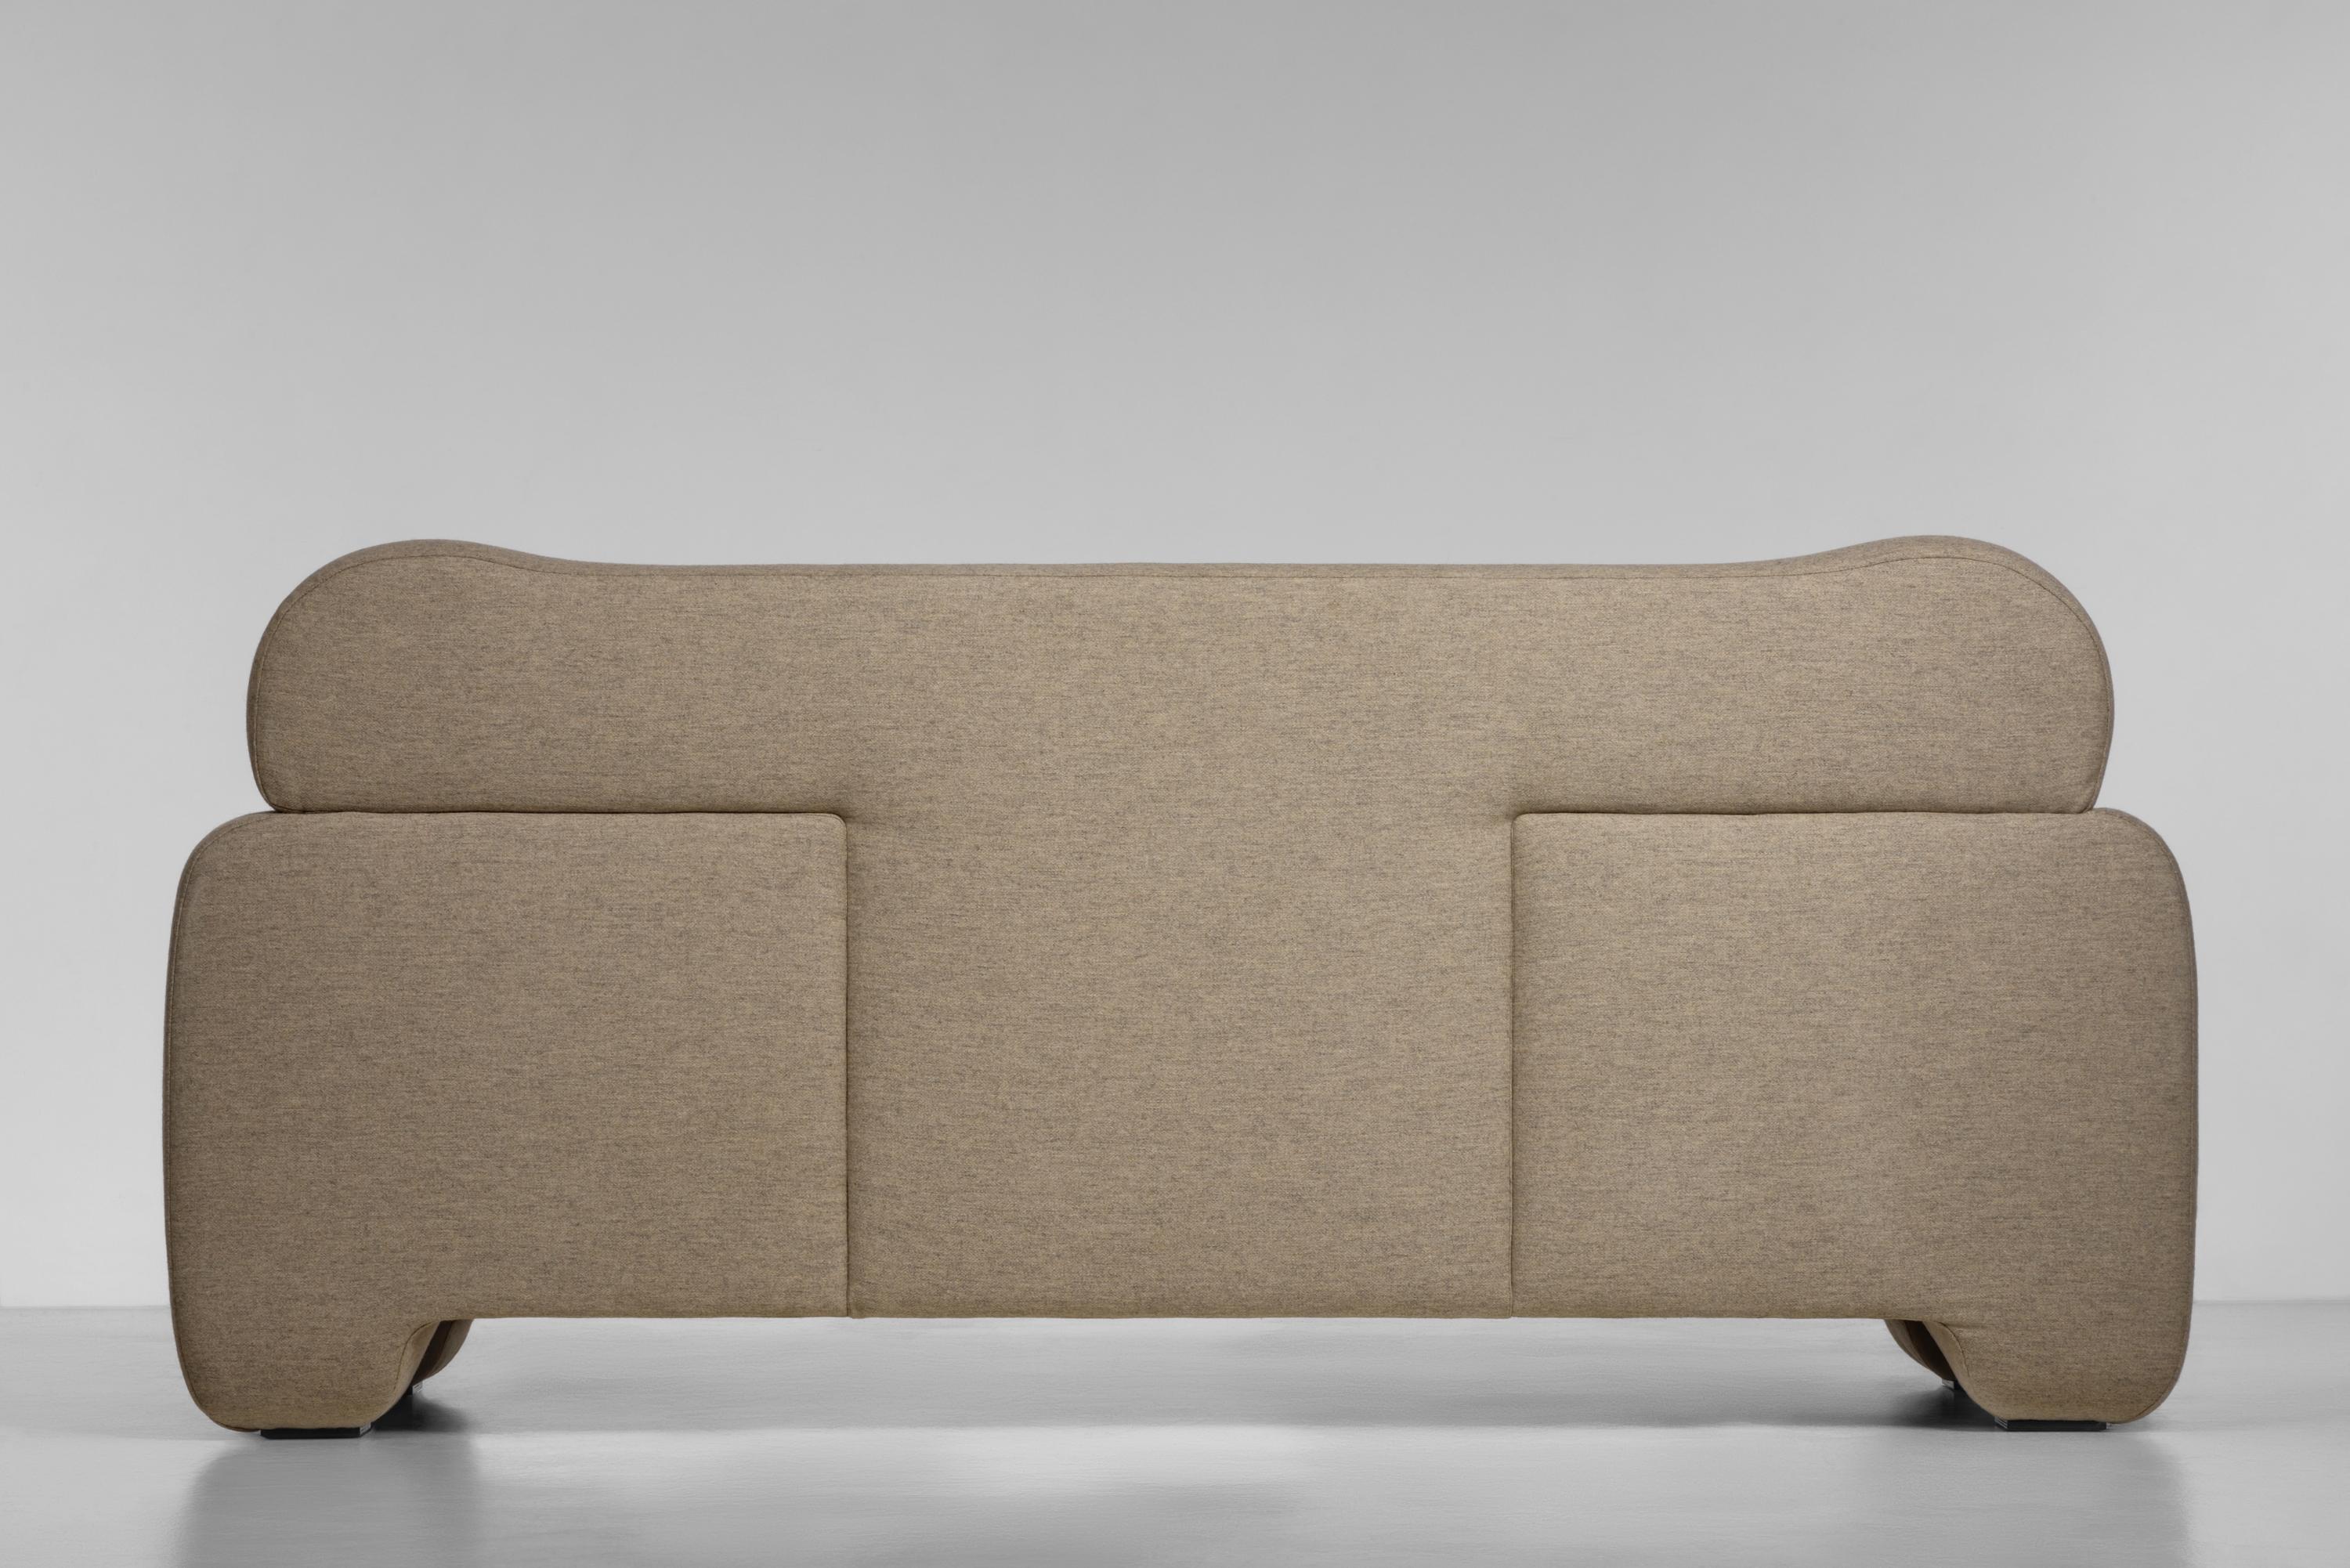 Fluffy Sofa by FAINA
Design: Victoriya Yakusha
Material: Textiles, Foam rubber, Sintepon, Wood
Dimensions: 180 × 82 × 79 cm, 35 Kg 

w 240 cm available, please contact us.

In search of new-old design messages, Victoria Yakusha conducted a study of